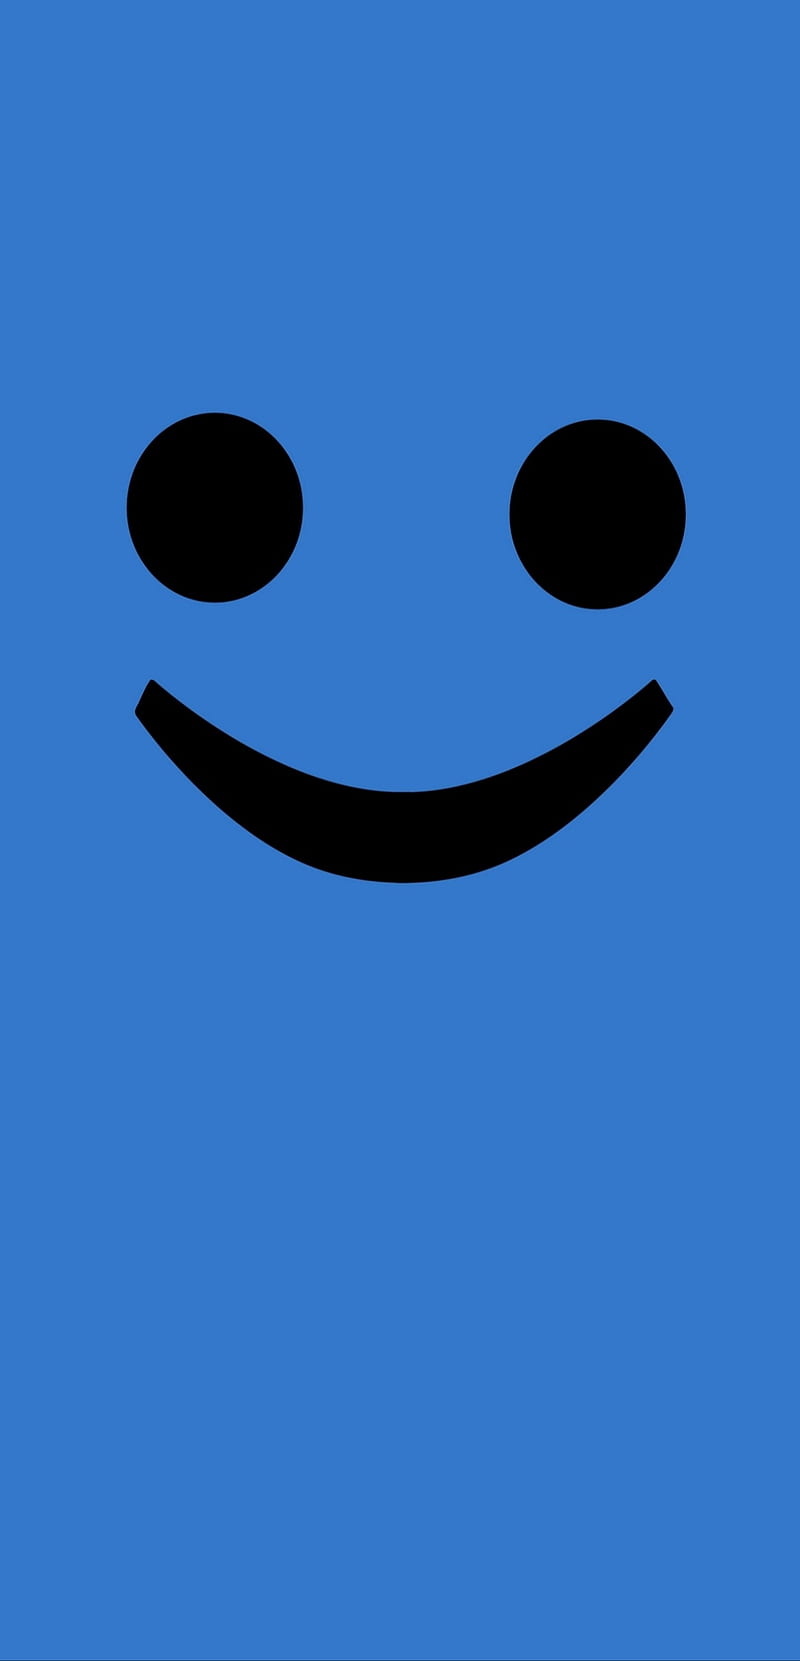 3d yellow smiley face icons on blue background Vector Image